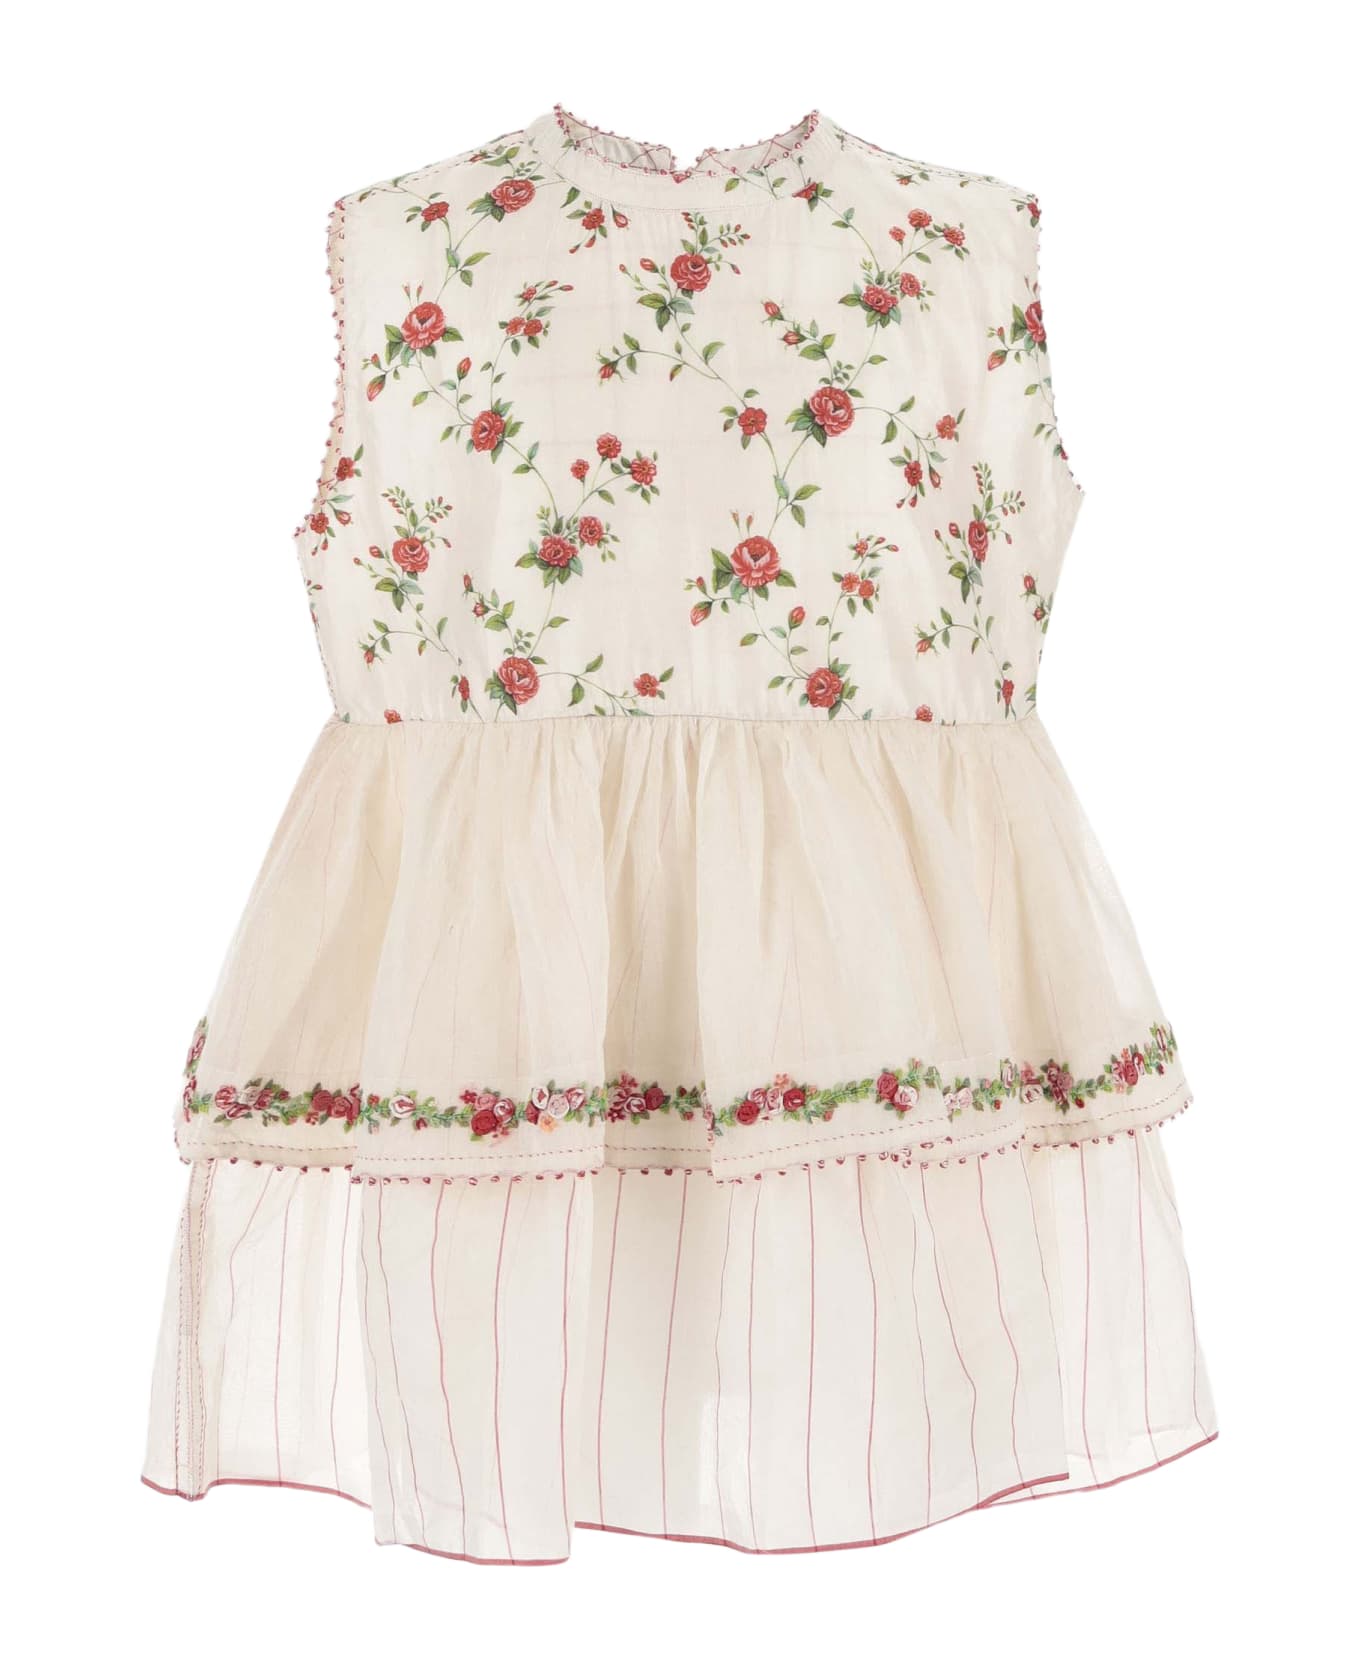 Péro Dress With Floral Pattern - Red